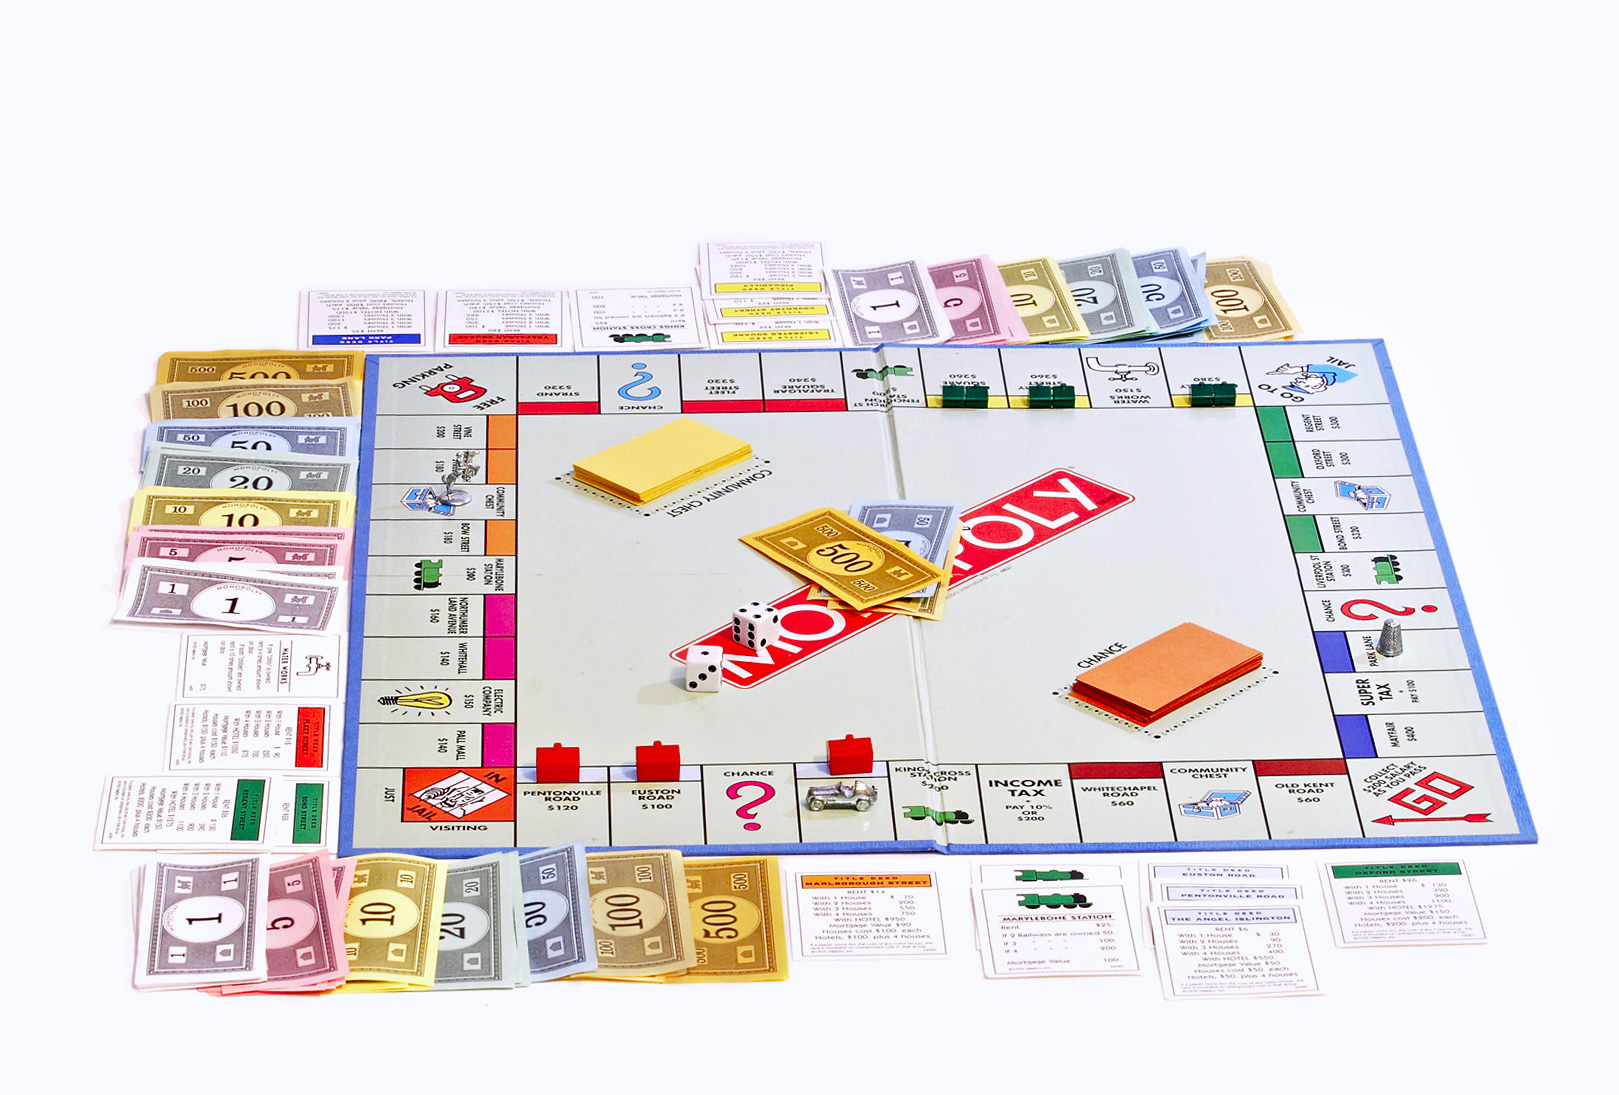 Monopoly board on white